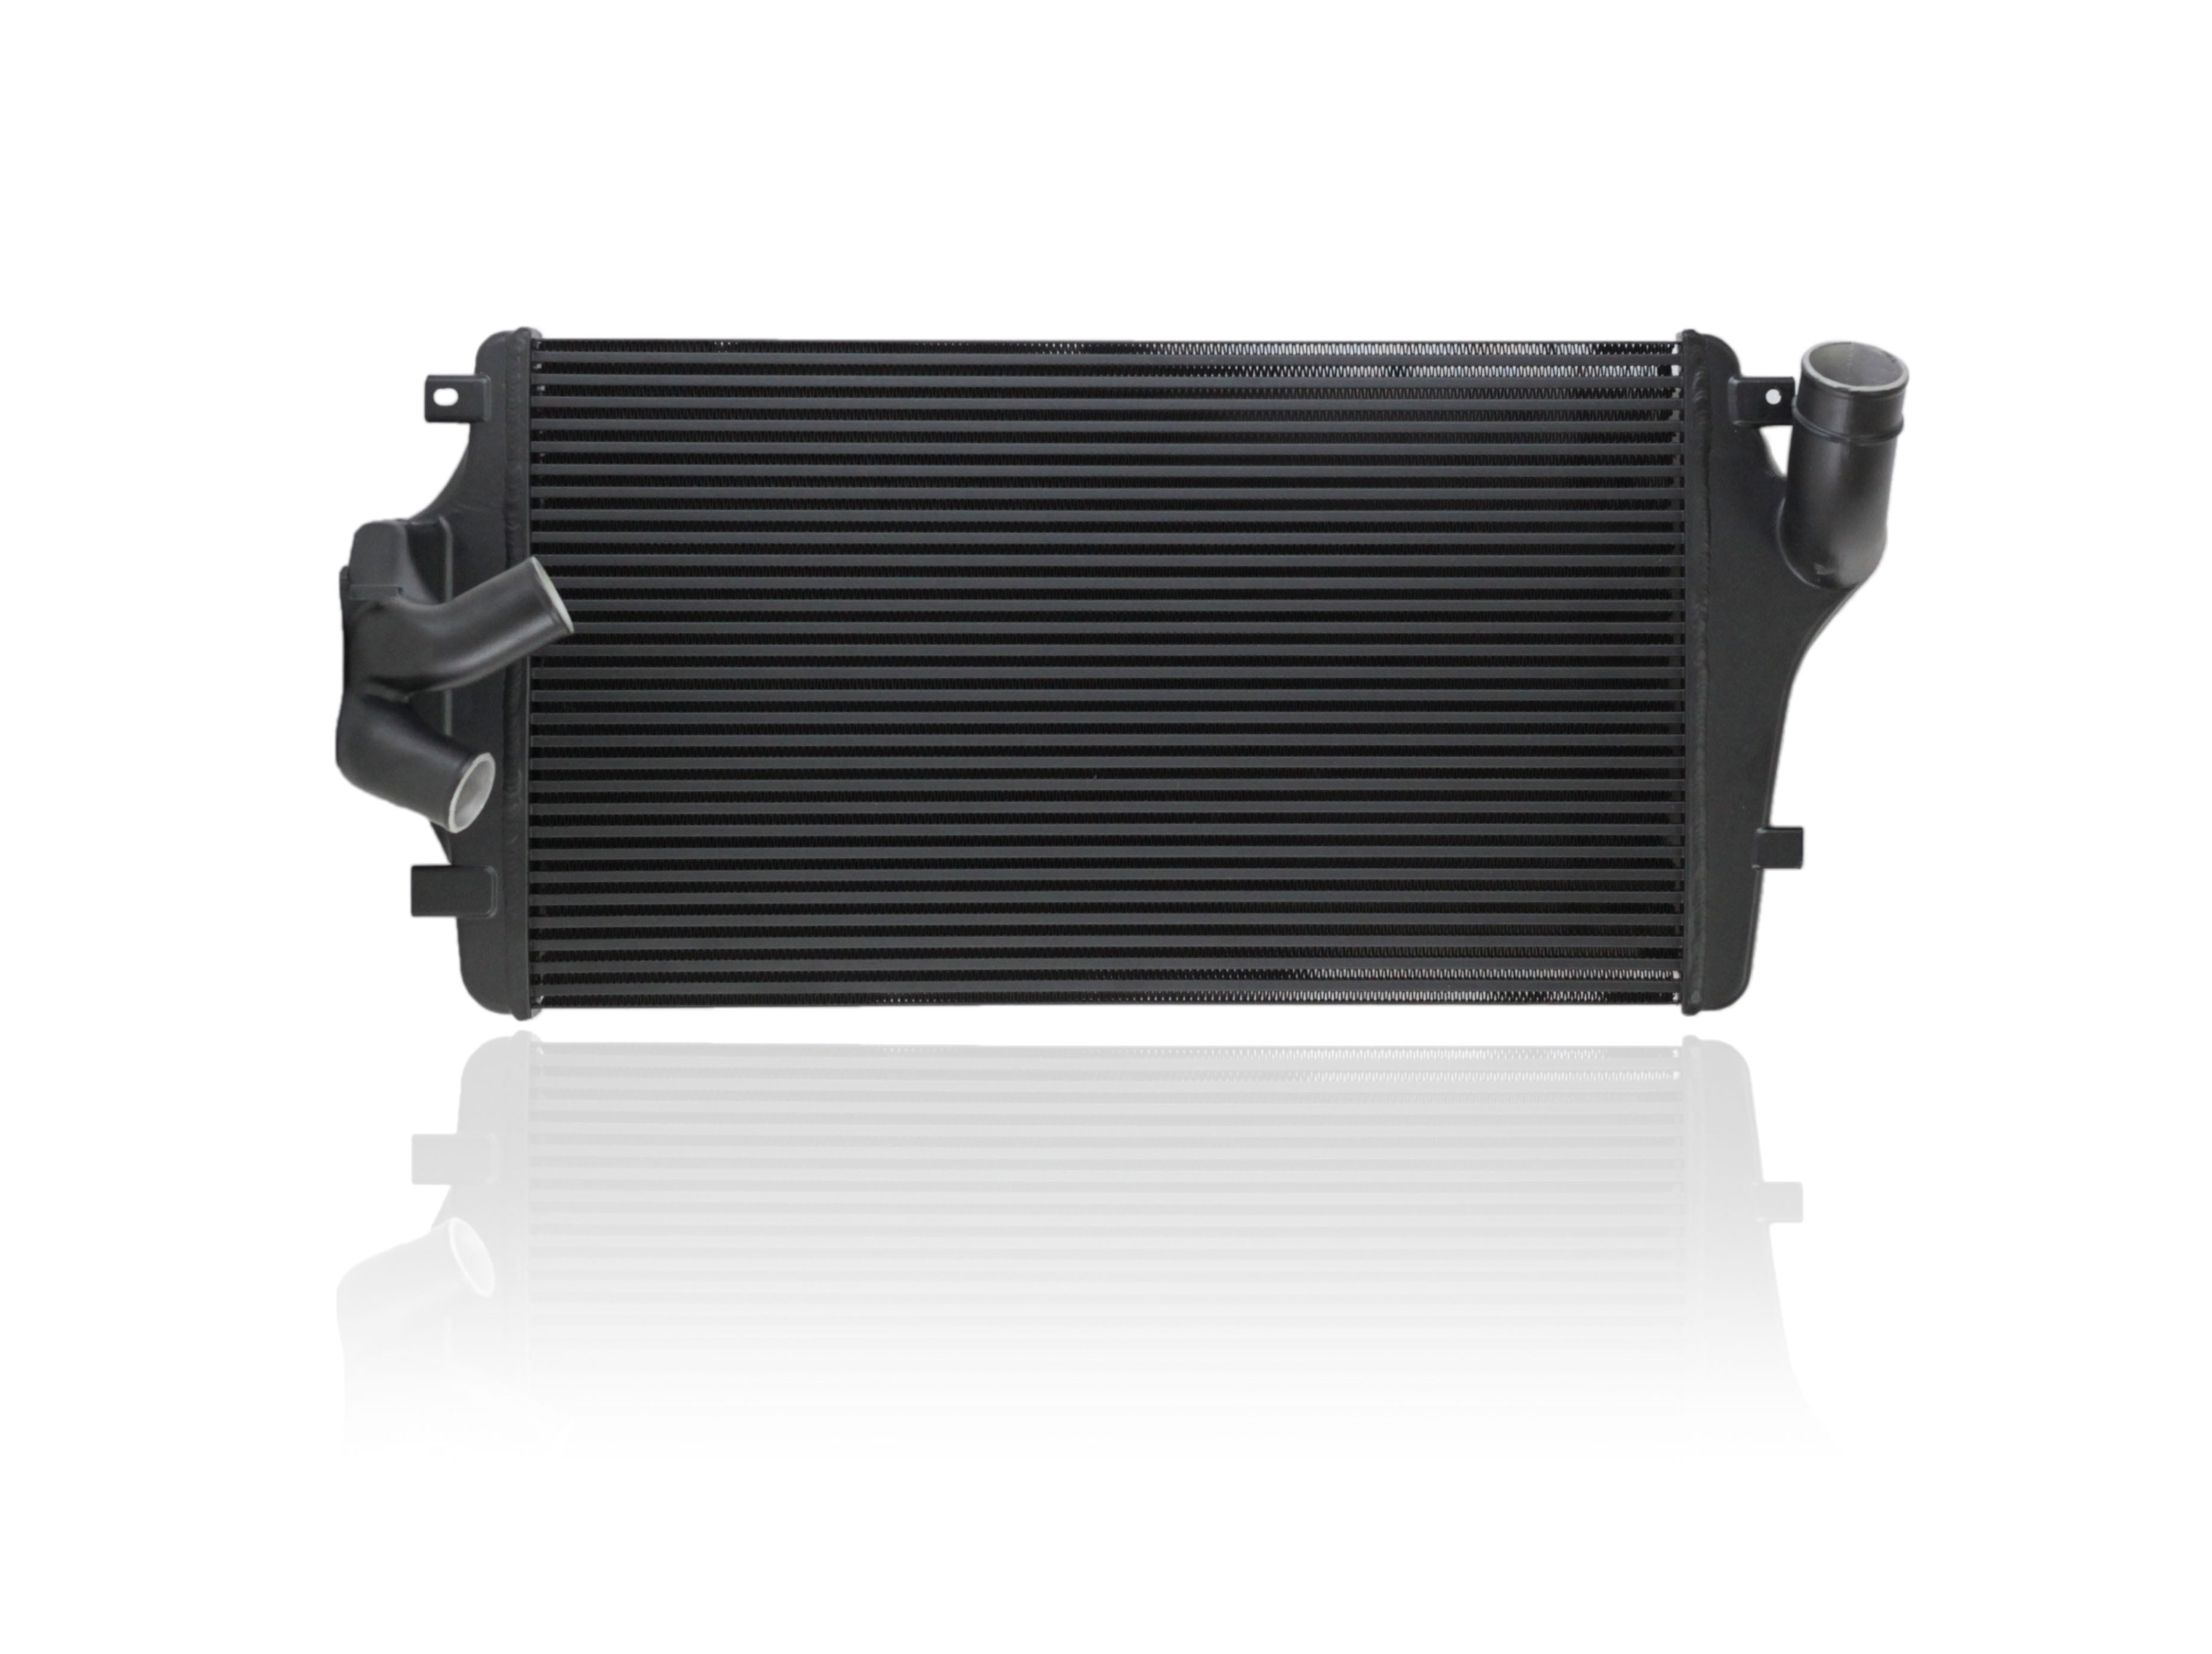 New Turbocharger Intercooler/Charge Air Cooler For 2013-2018 Ford Explorer 3.5L Turbocharged V6 FO3012110 